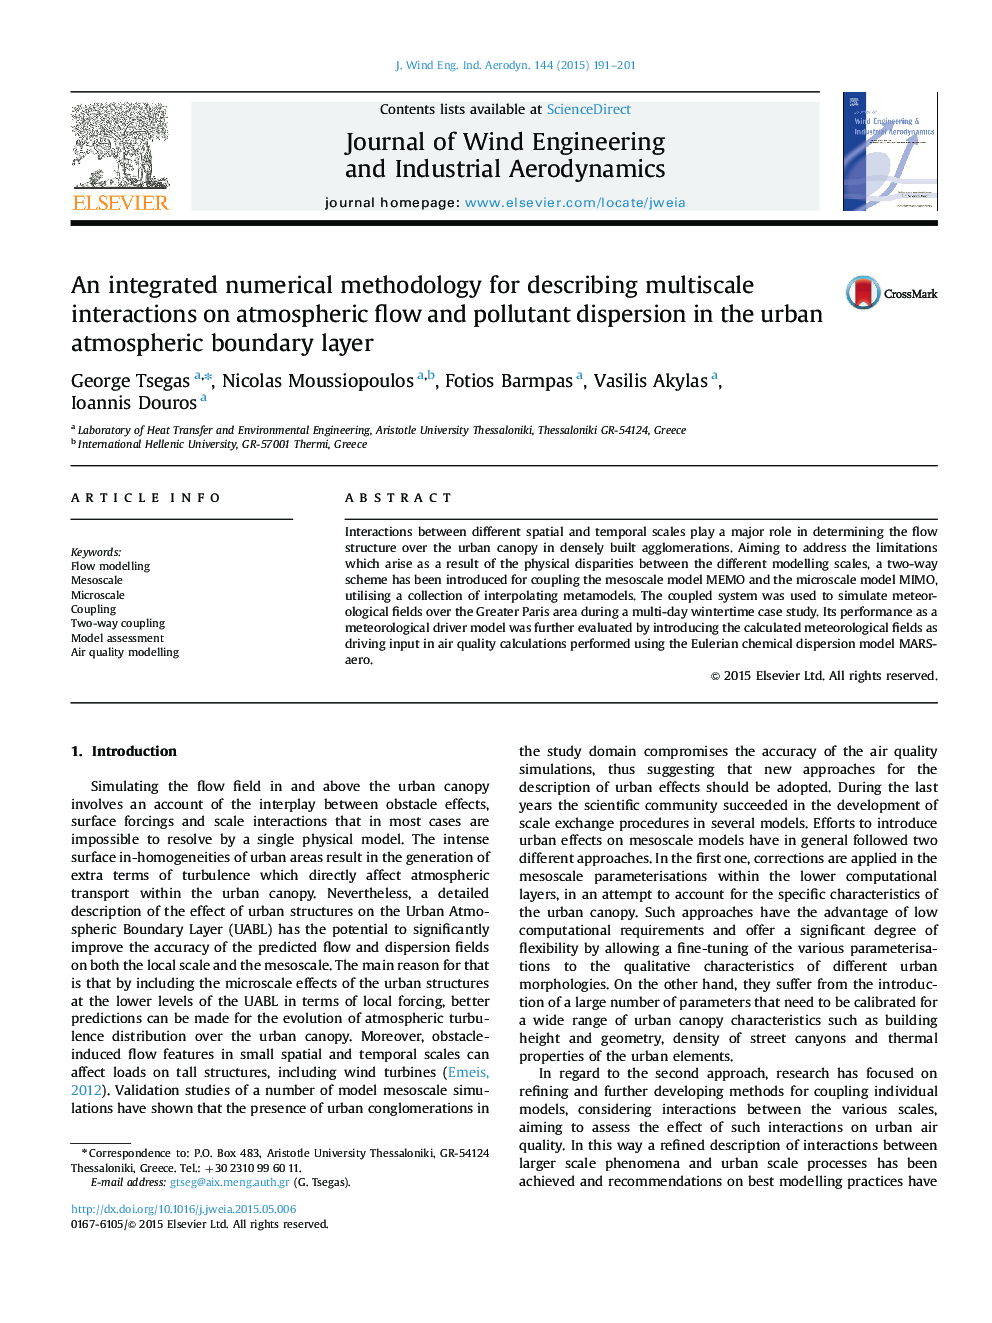 An integrated numerical methodology for describing multiscale interactions on atmospheric flow and pollutant dispersion in the urban atmospheric boundary layer